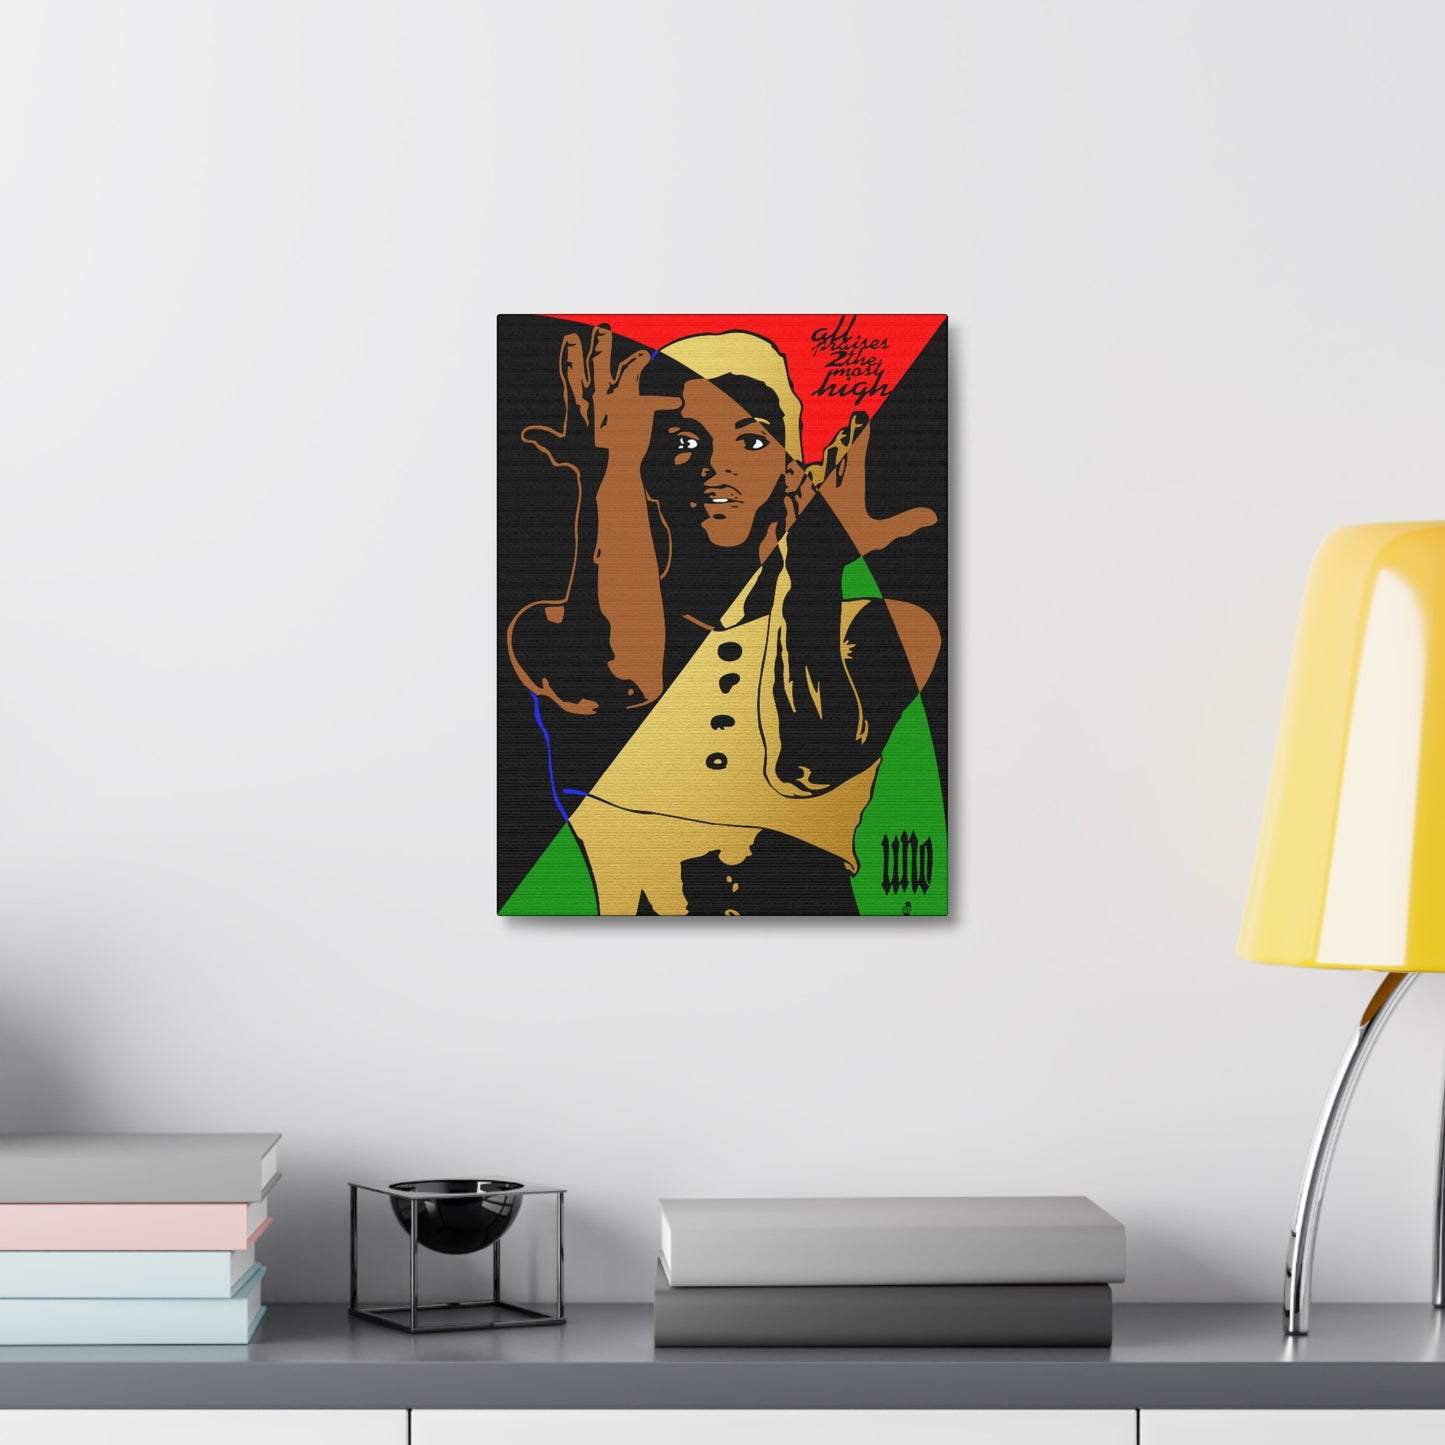 UNO PRINCE TAKEMEWITHYOU 12x16, 18x24, & 24x30" Stretched Canvas